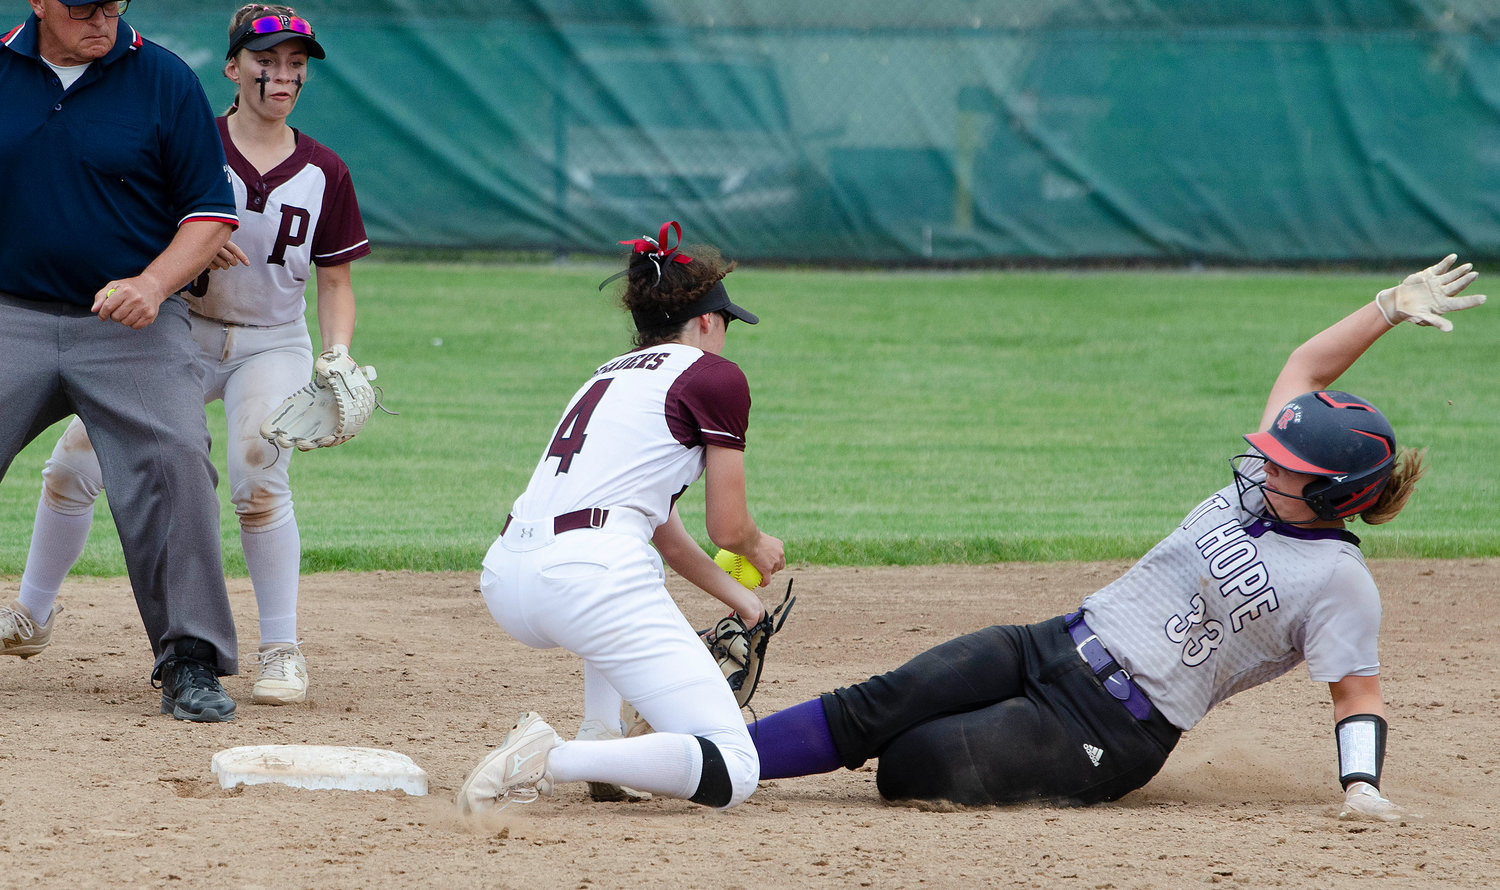 Grace Stephenson steals second base in the hopes of an insurance run in the top of the tenth with the Huskies up 2-1, but she was stranded.